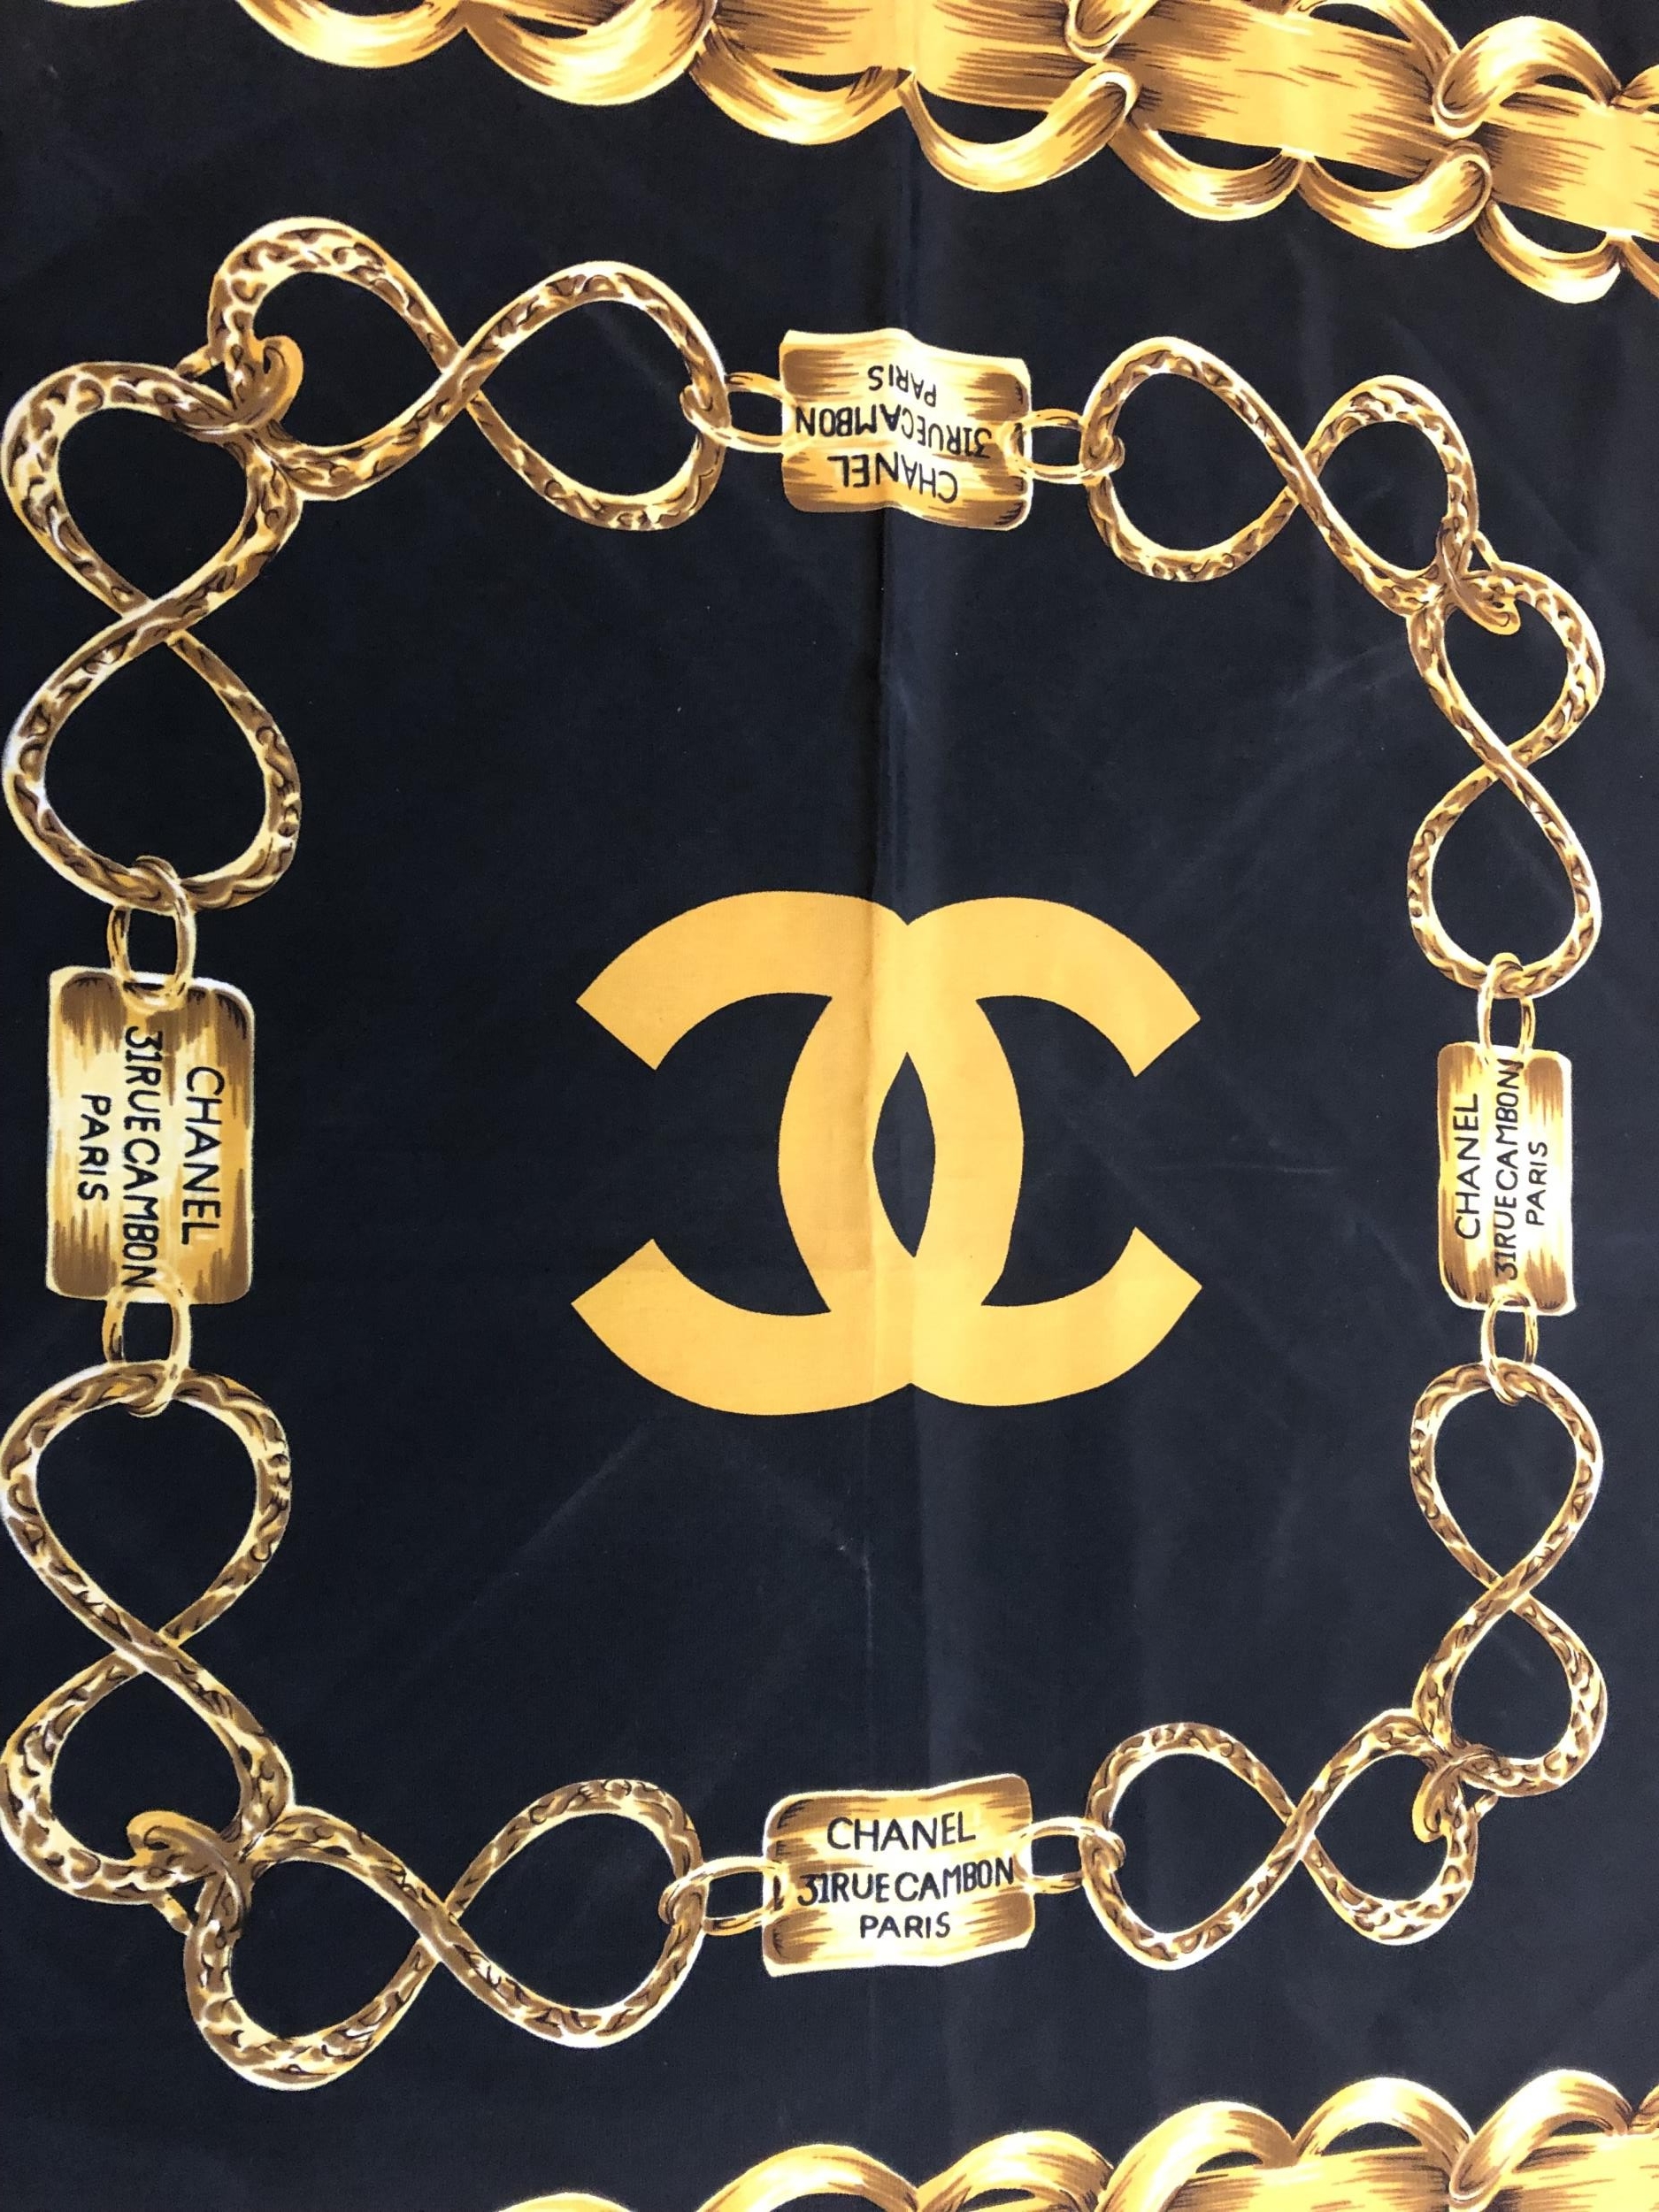 A Chanel scarf - Image 3 of 6